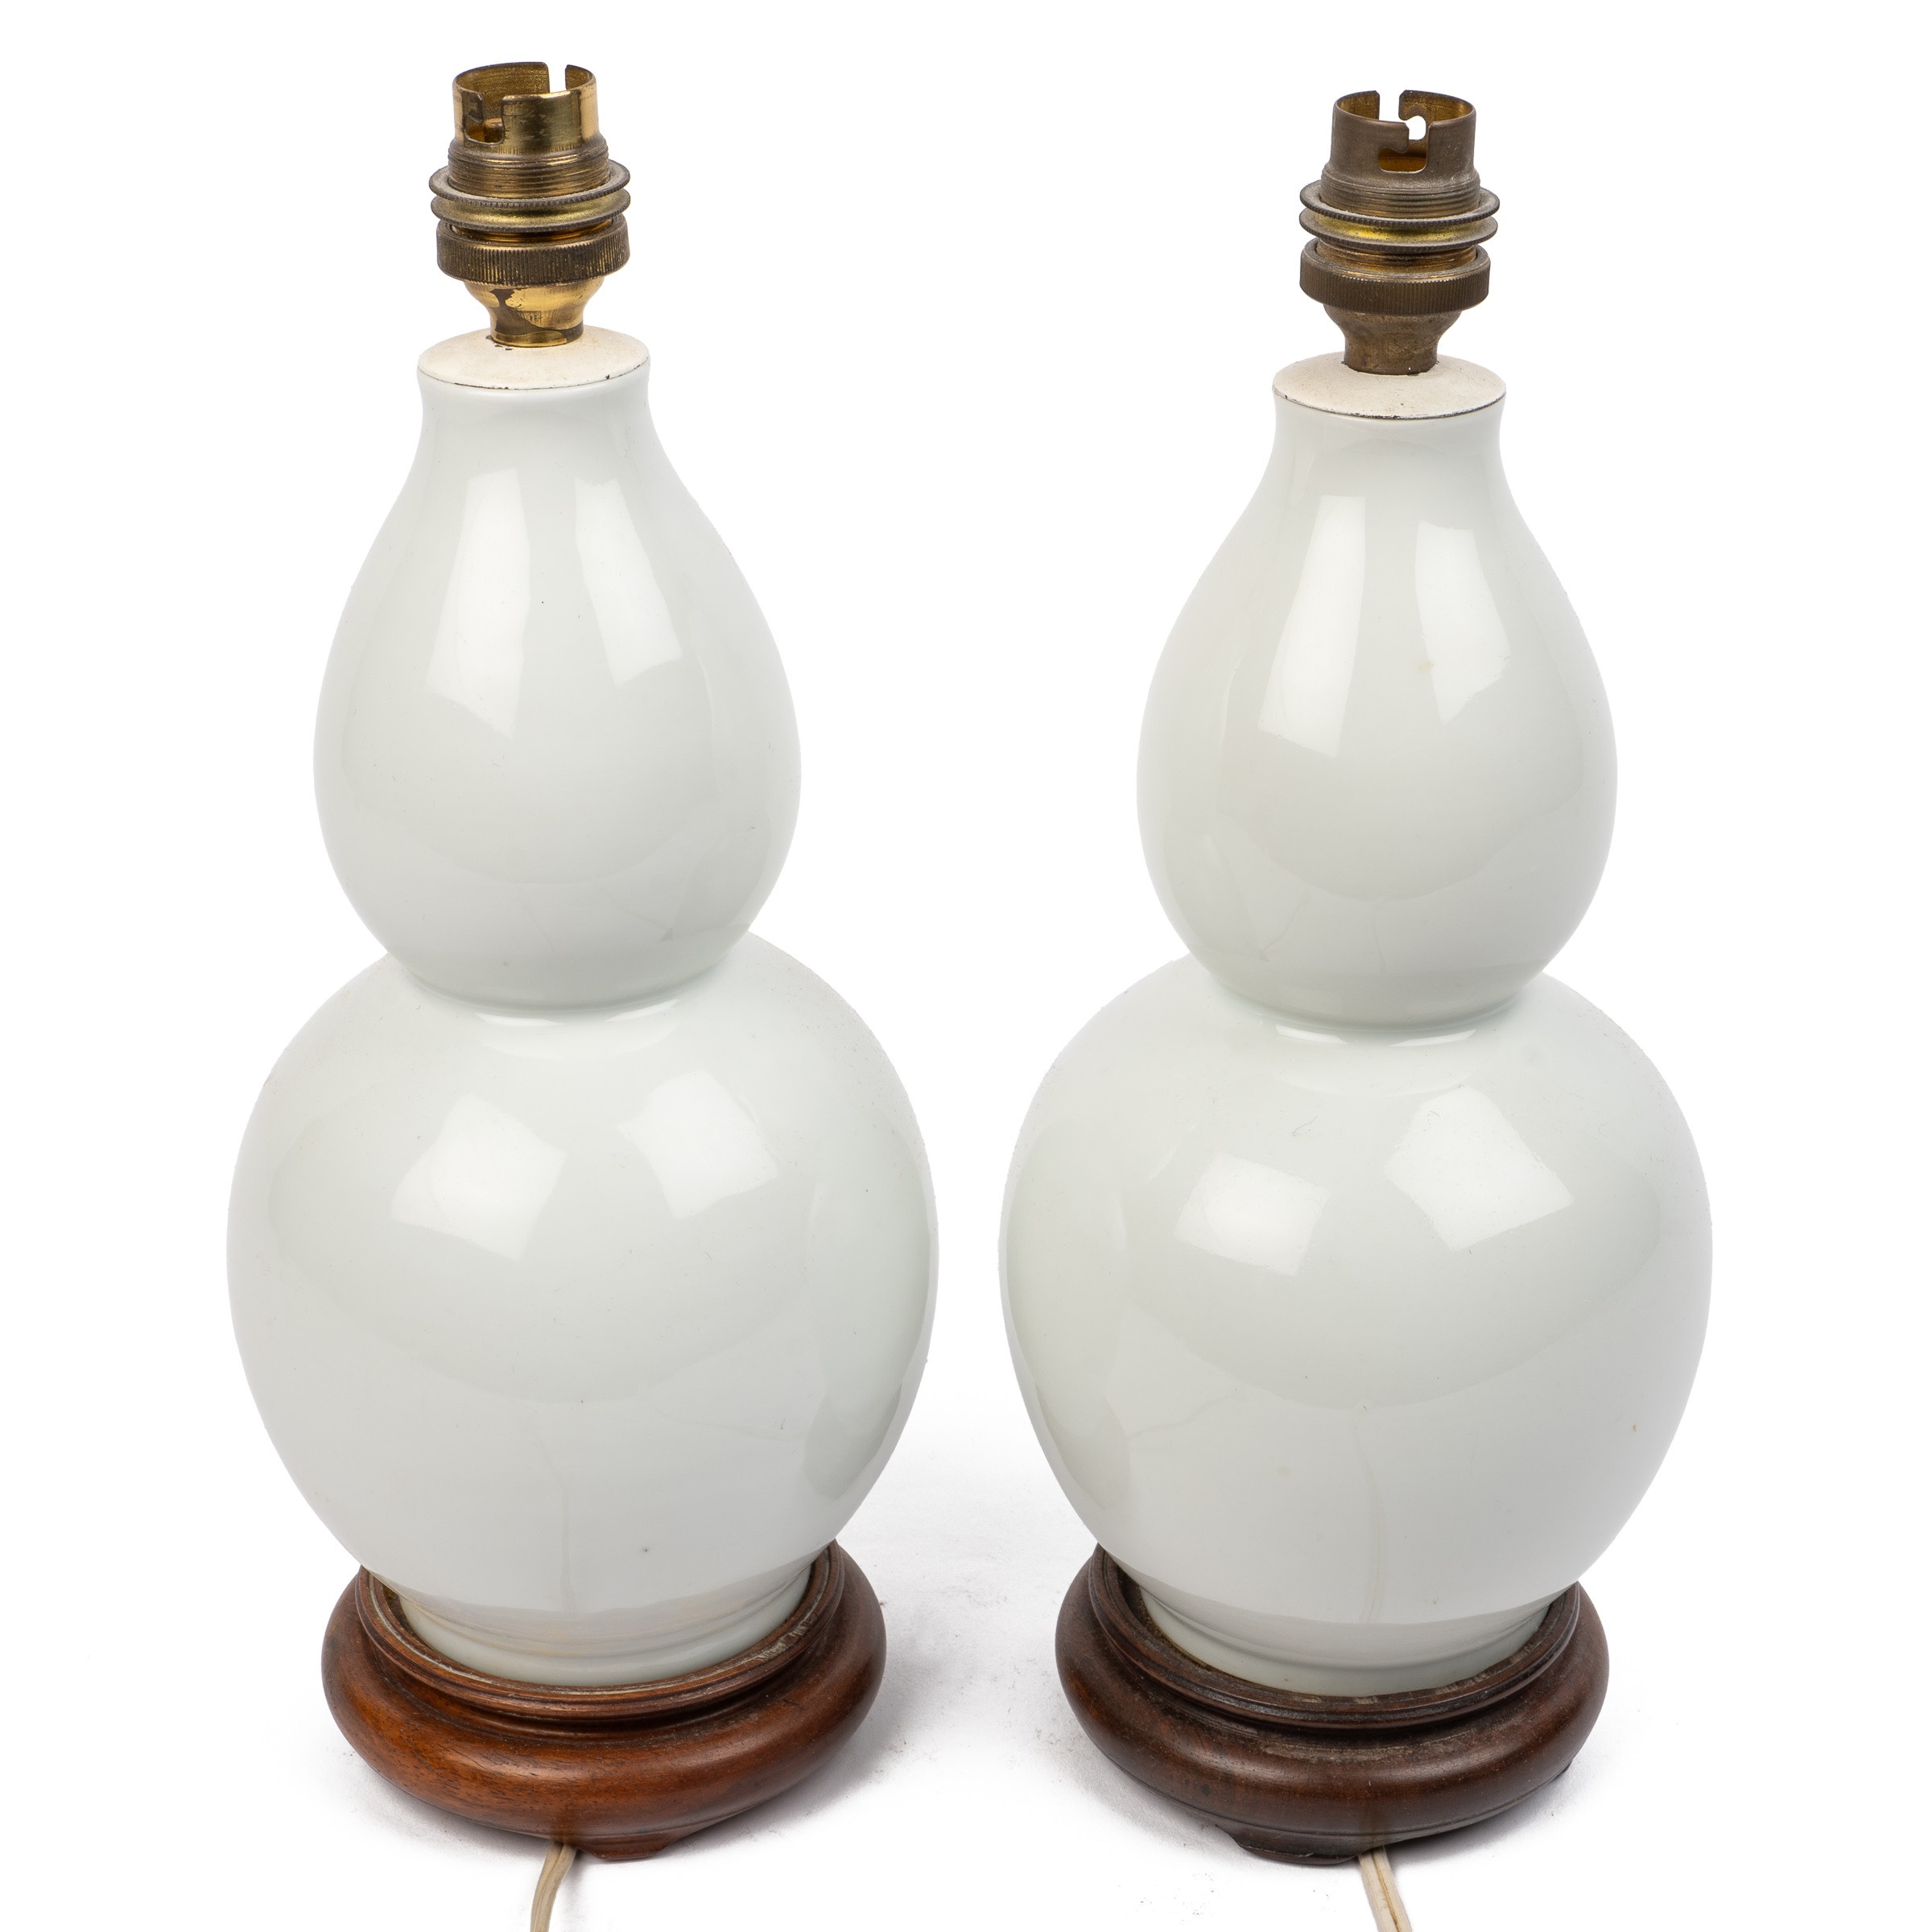 A pair of white porcelain table lamps - Image 2 of 2